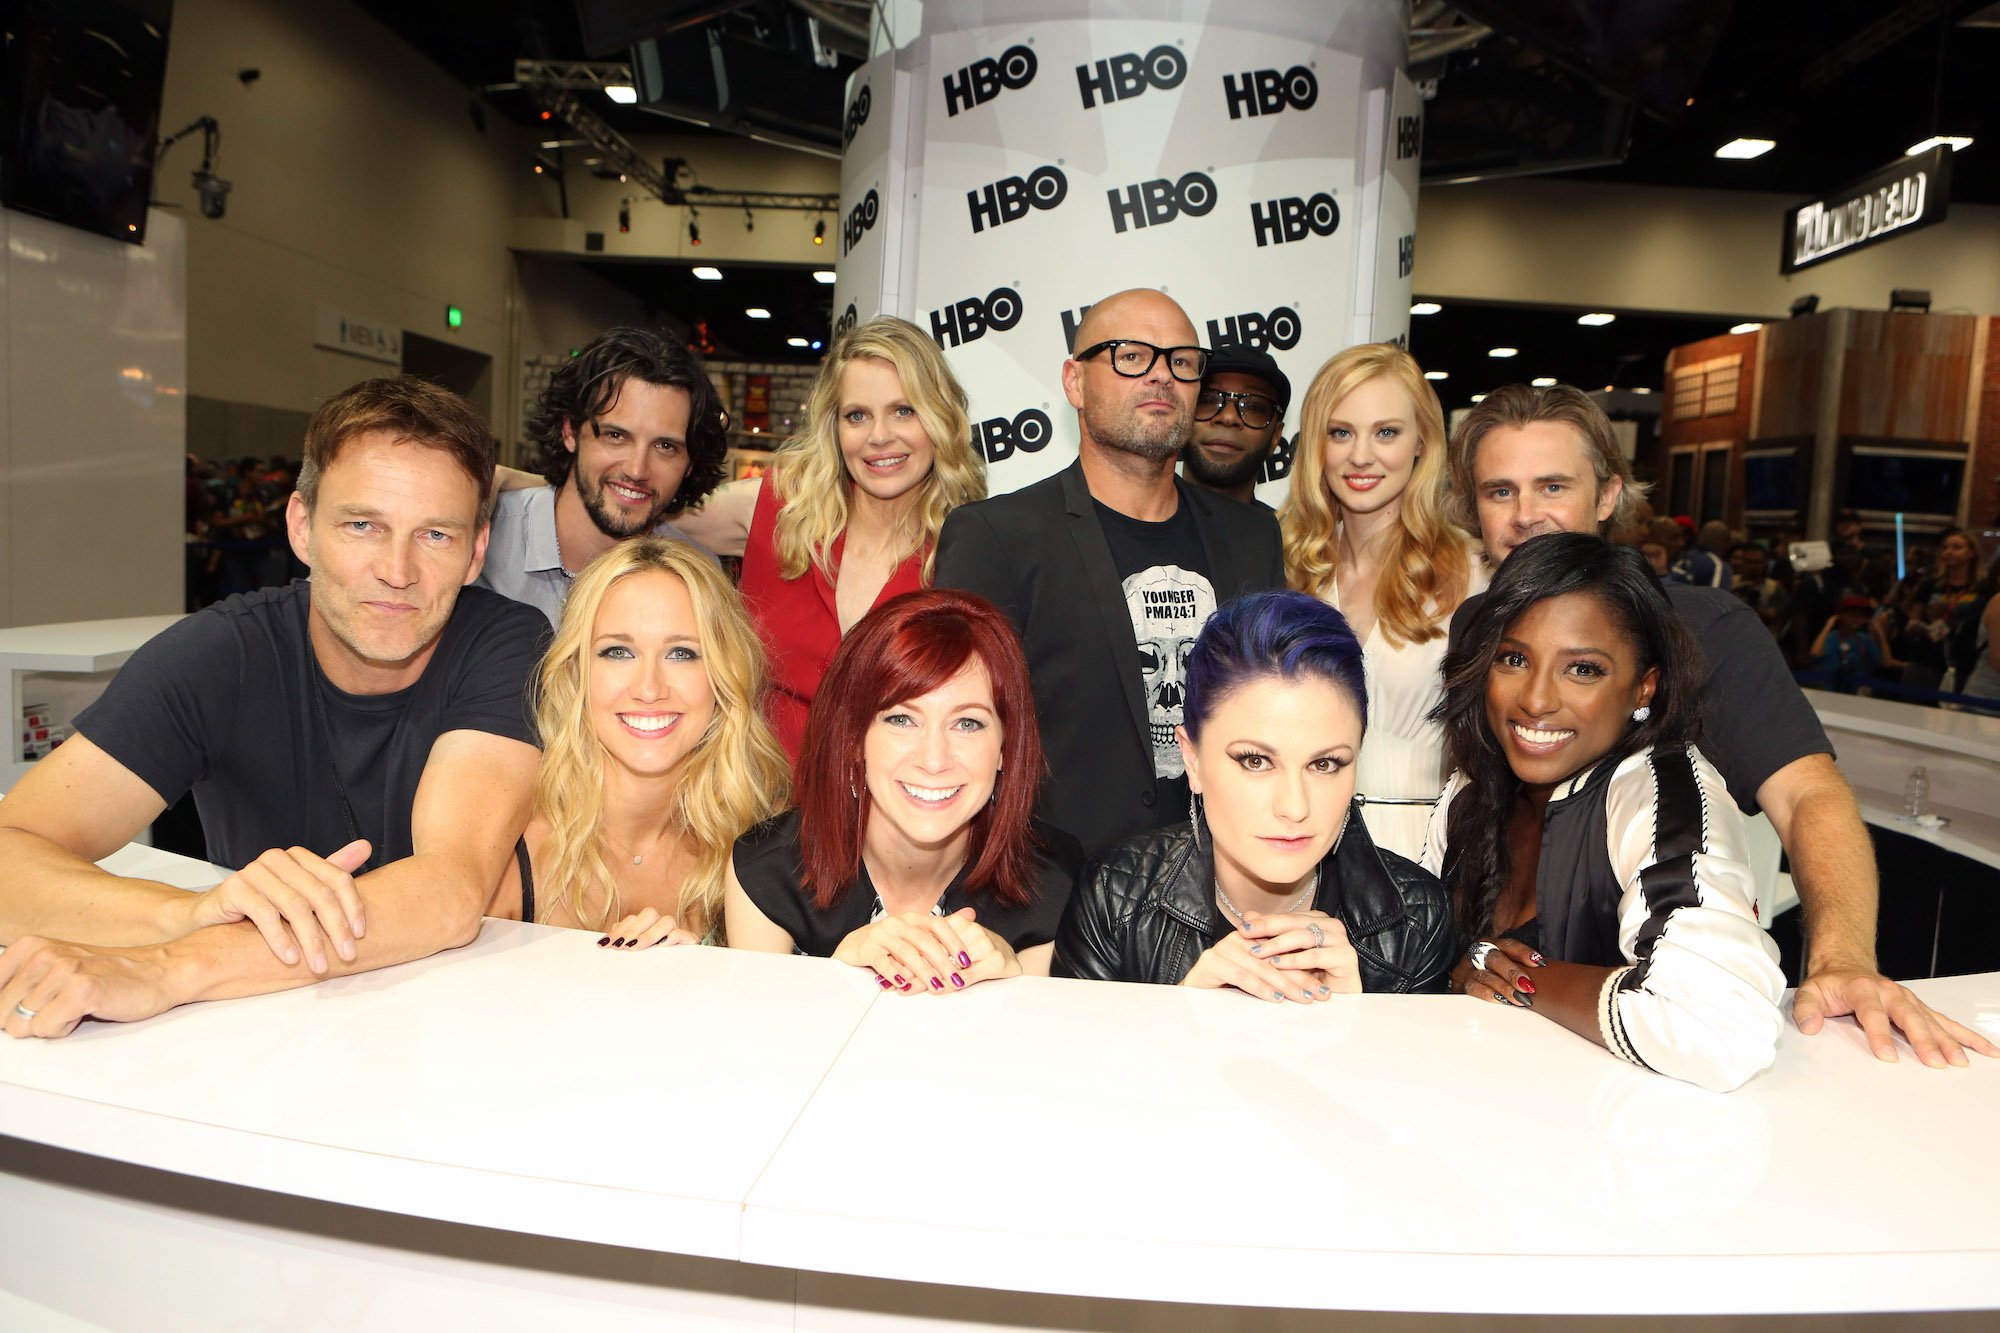 (L-R) Stephen Moyer, Anna Camp, Carrie Preston, Anna Paquin and Rutina Wesley; back row, from L-R: Nathan Parsons, Kristin Bauer van Straten, Chris Bauer, Nelsan Ellis, Deborah Ann Woll and Sam Trammell smiling